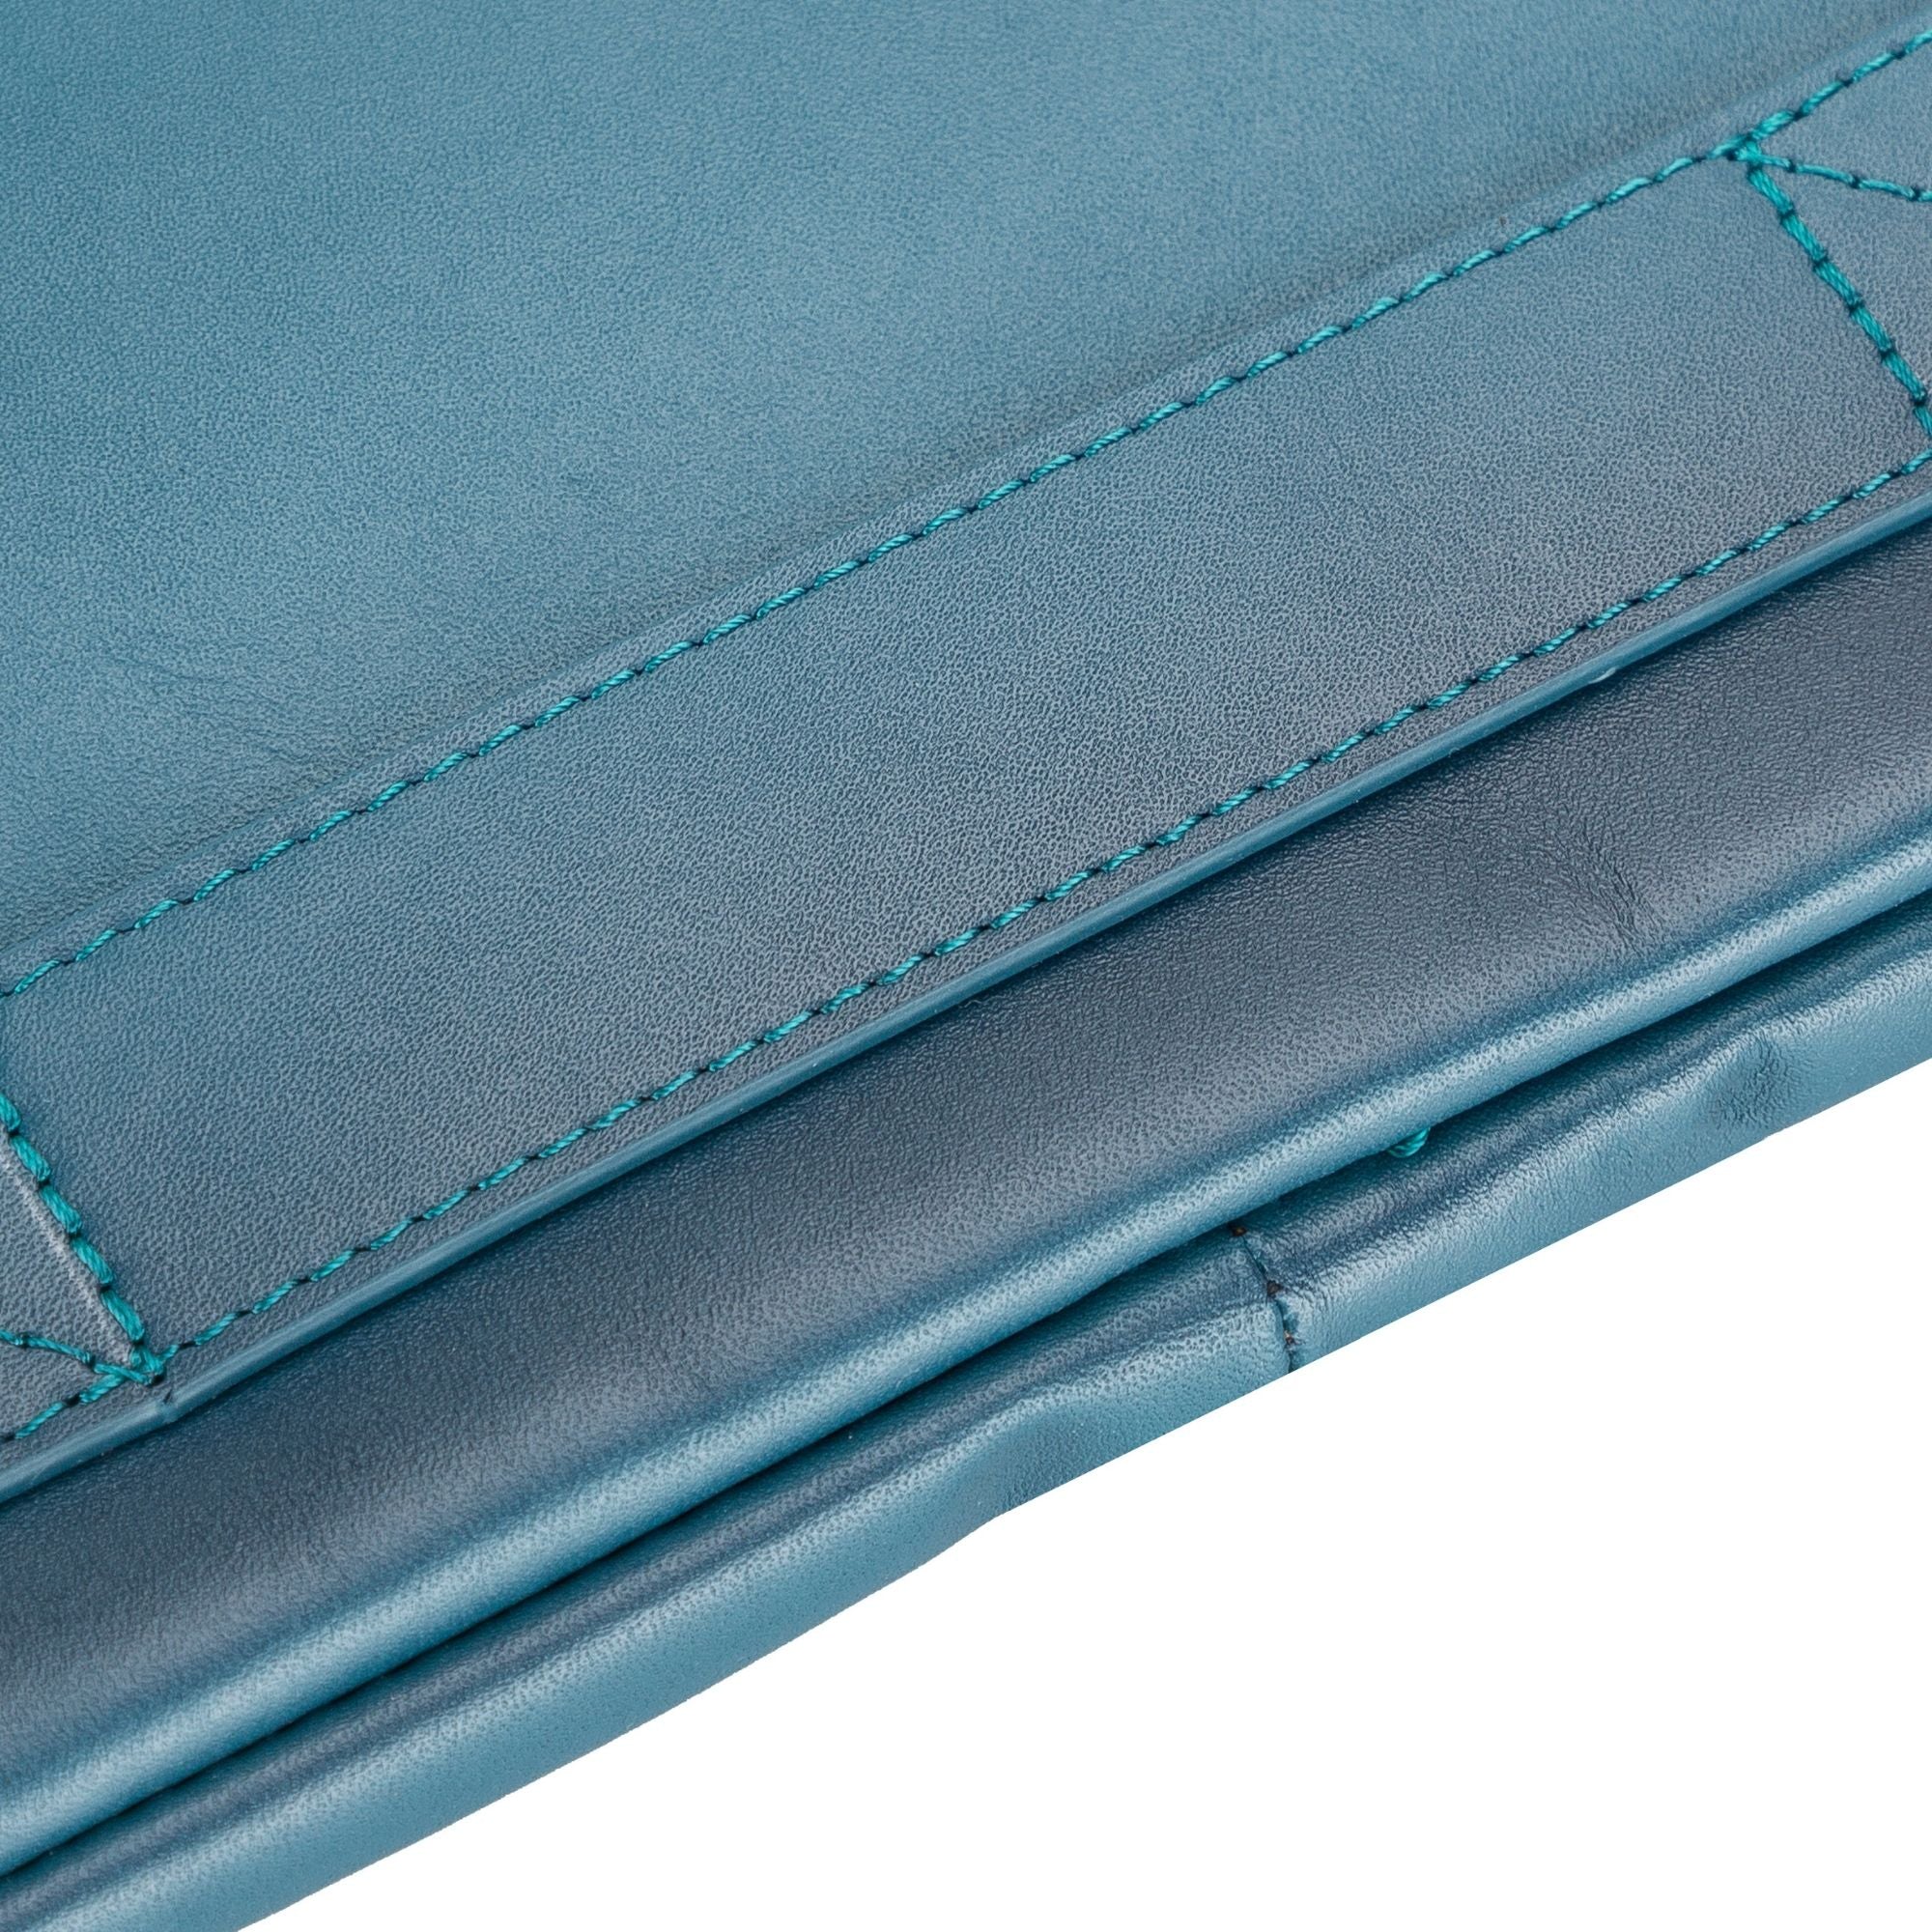 Kemmerer Leather Sleeve for iPad and MacBook - 11 Inches - Blue - TORONATA